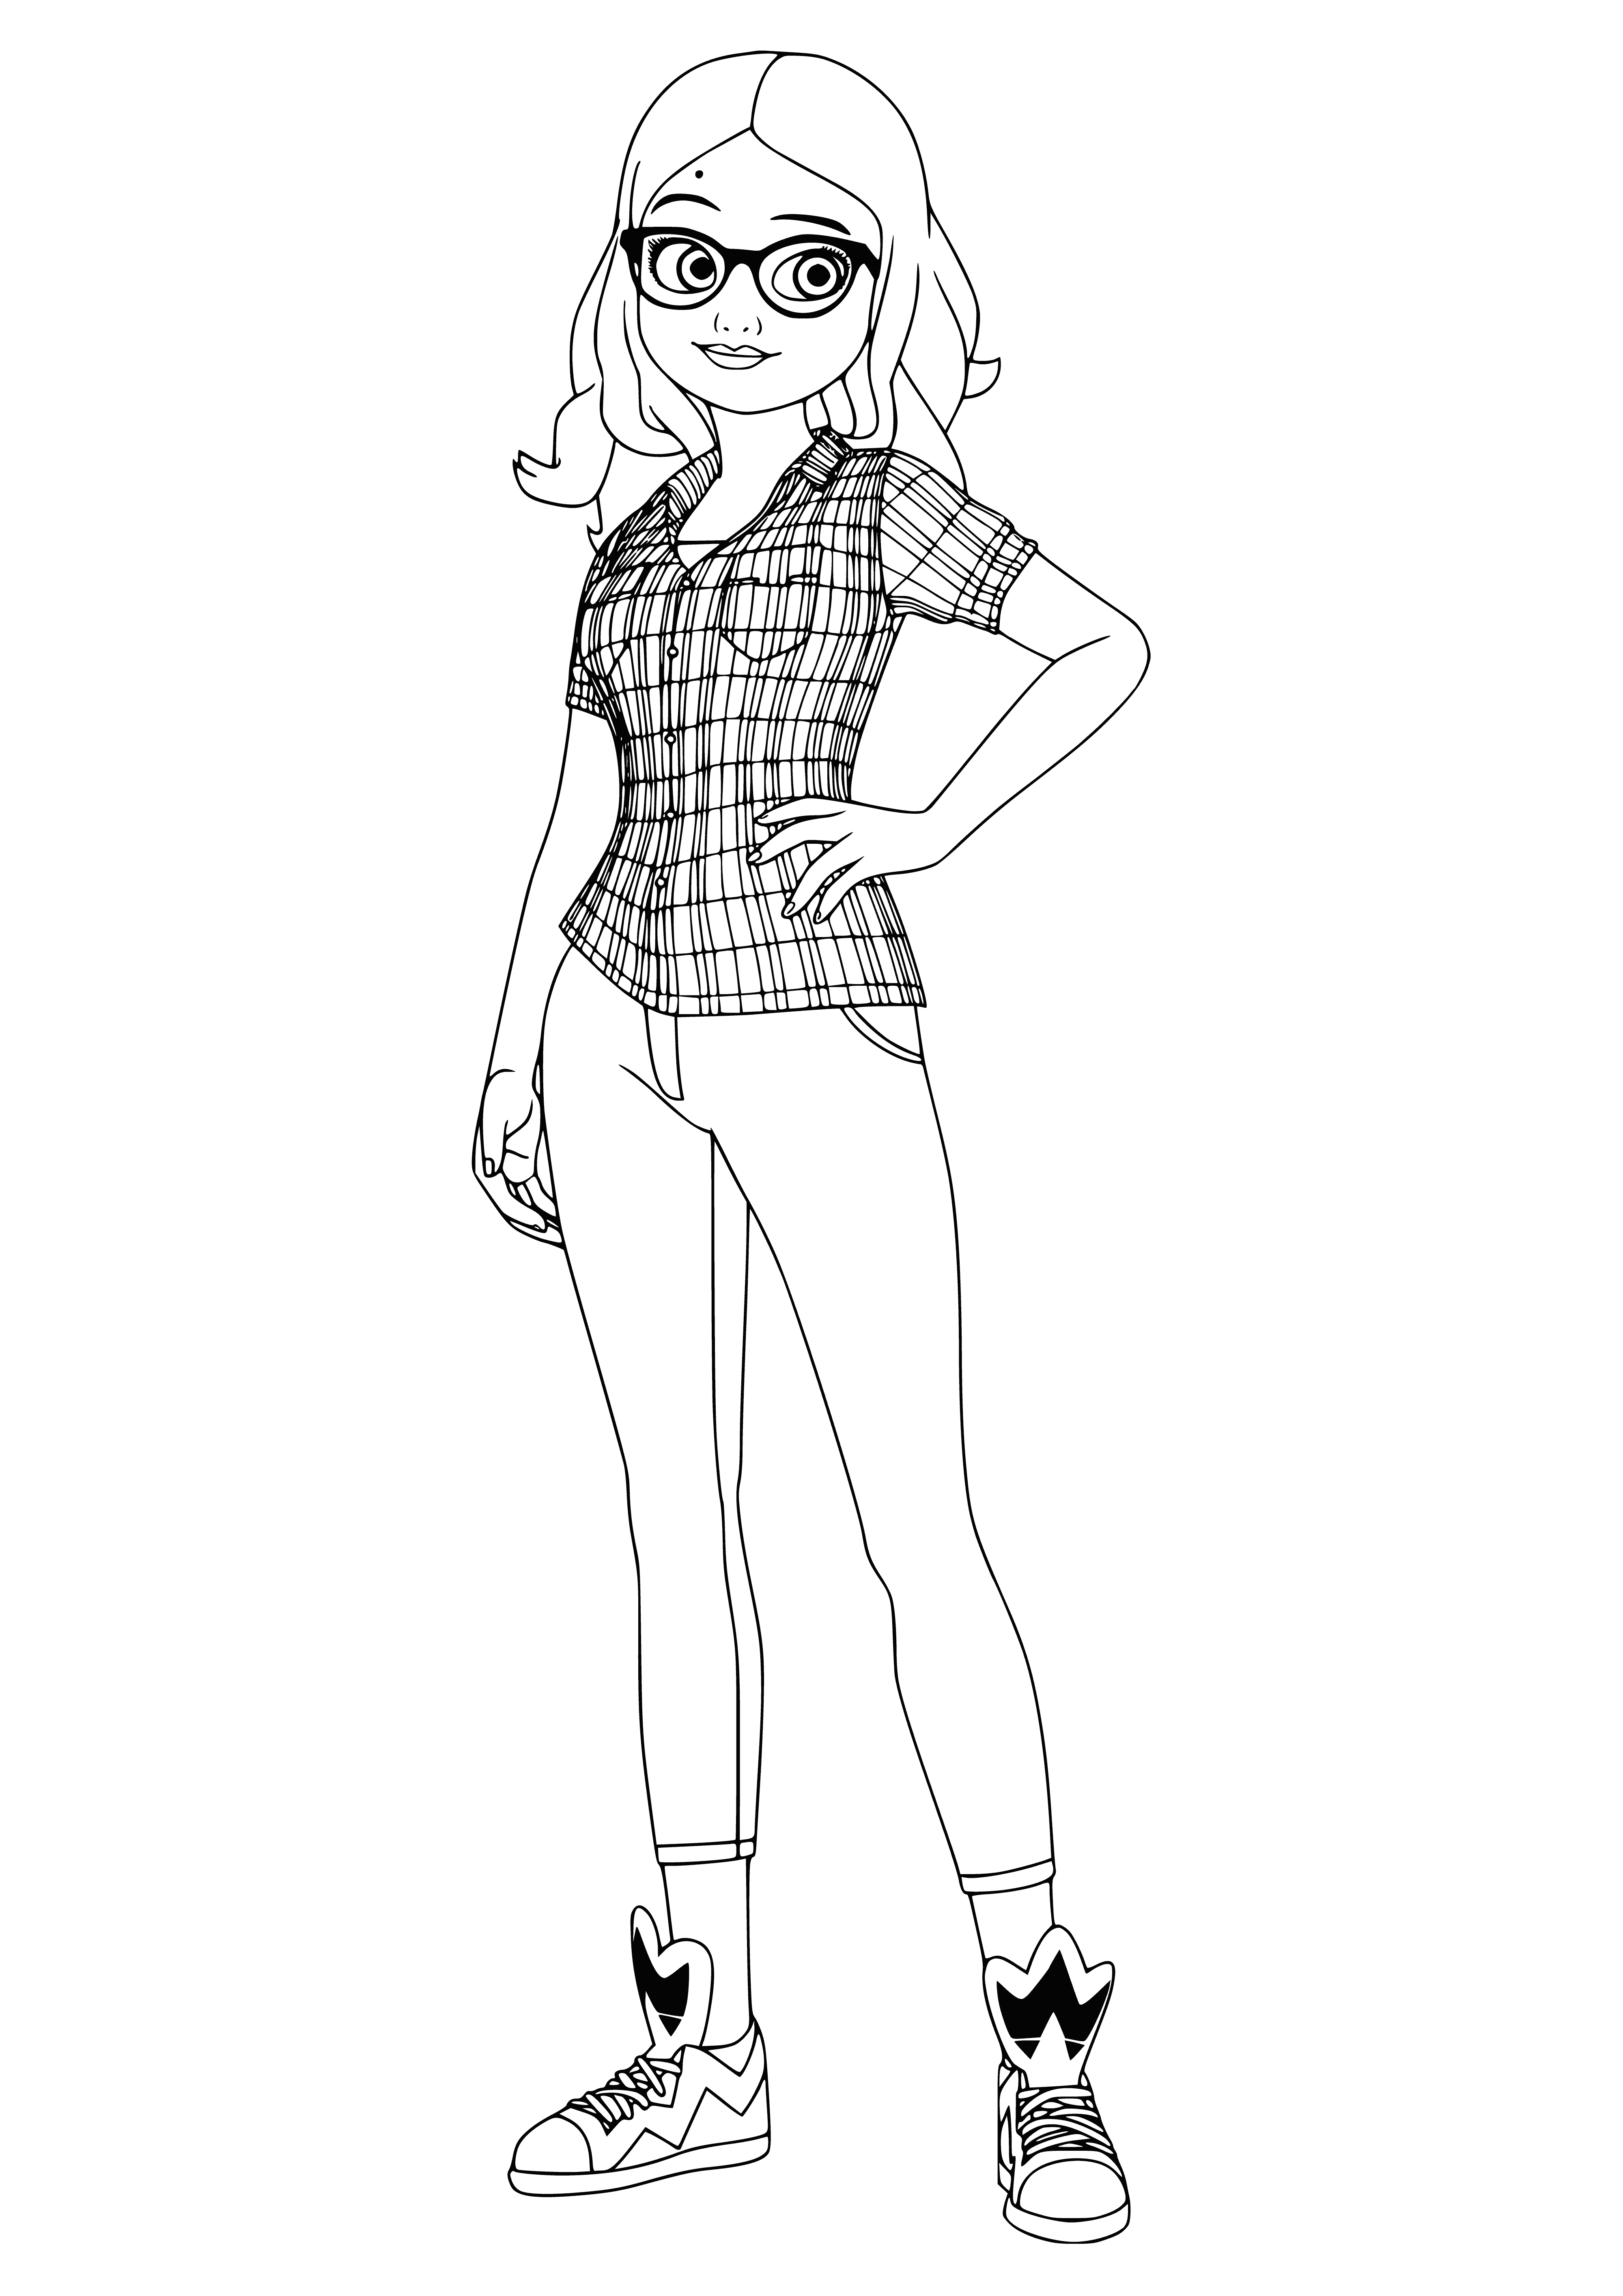 coloring page: A woman stands at a law enforcement building with a sign "Ala Cesar”; crowd gathered around her demands "Free Ladybug!" and "We Love Ladybug!" #protests #Ladybug